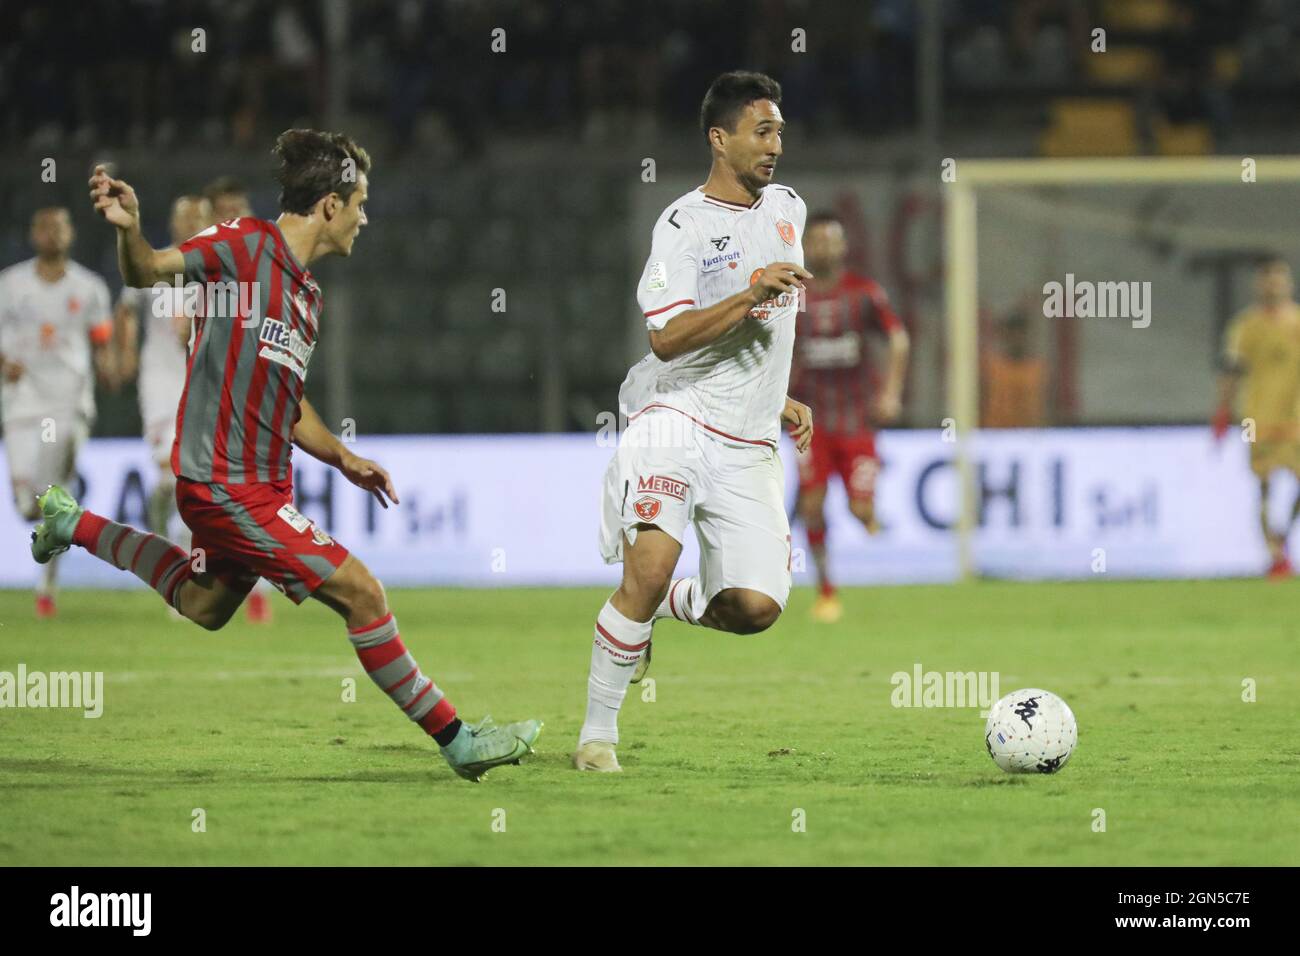 Cremona, Italy. 22nd Sep, 2021. Matos Ryder (Perugia) goes for the counter attack during US Cremonese vs AC Perugia, Italian Football Championship League BKT in Cremona, Italy, September 22 2021 Credit: Independent Photo Agency/Alamy Live News Stock Photo